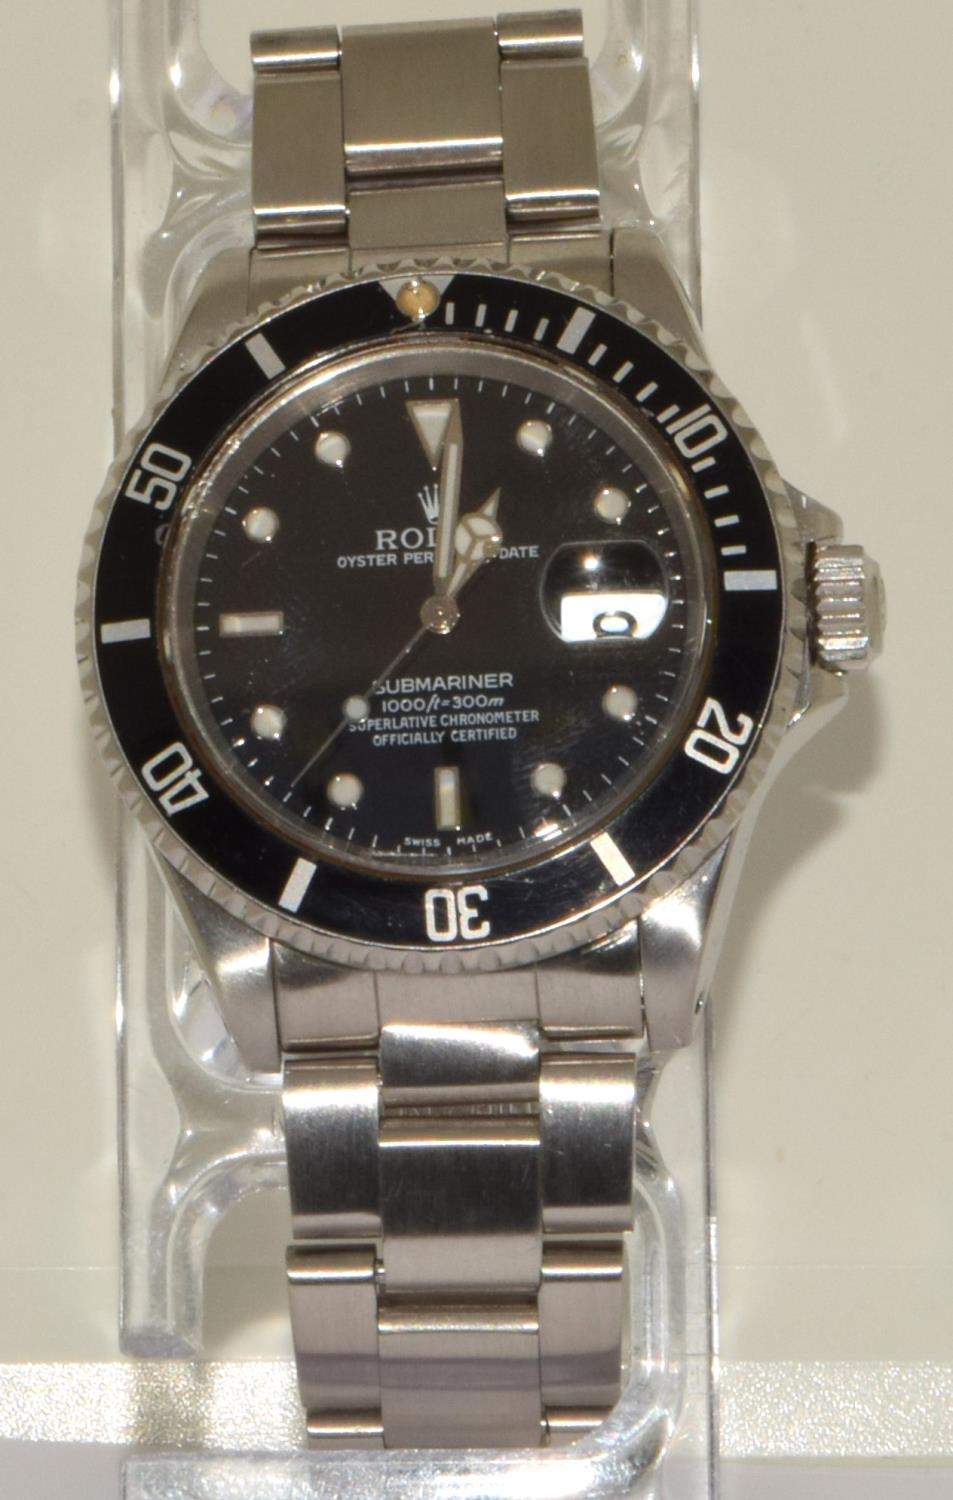 Rolex Submariner model 16610 year 1995. W72***3 bracelet 93150 clasp codes DE10 has booklet and box, - Image 3 of 9